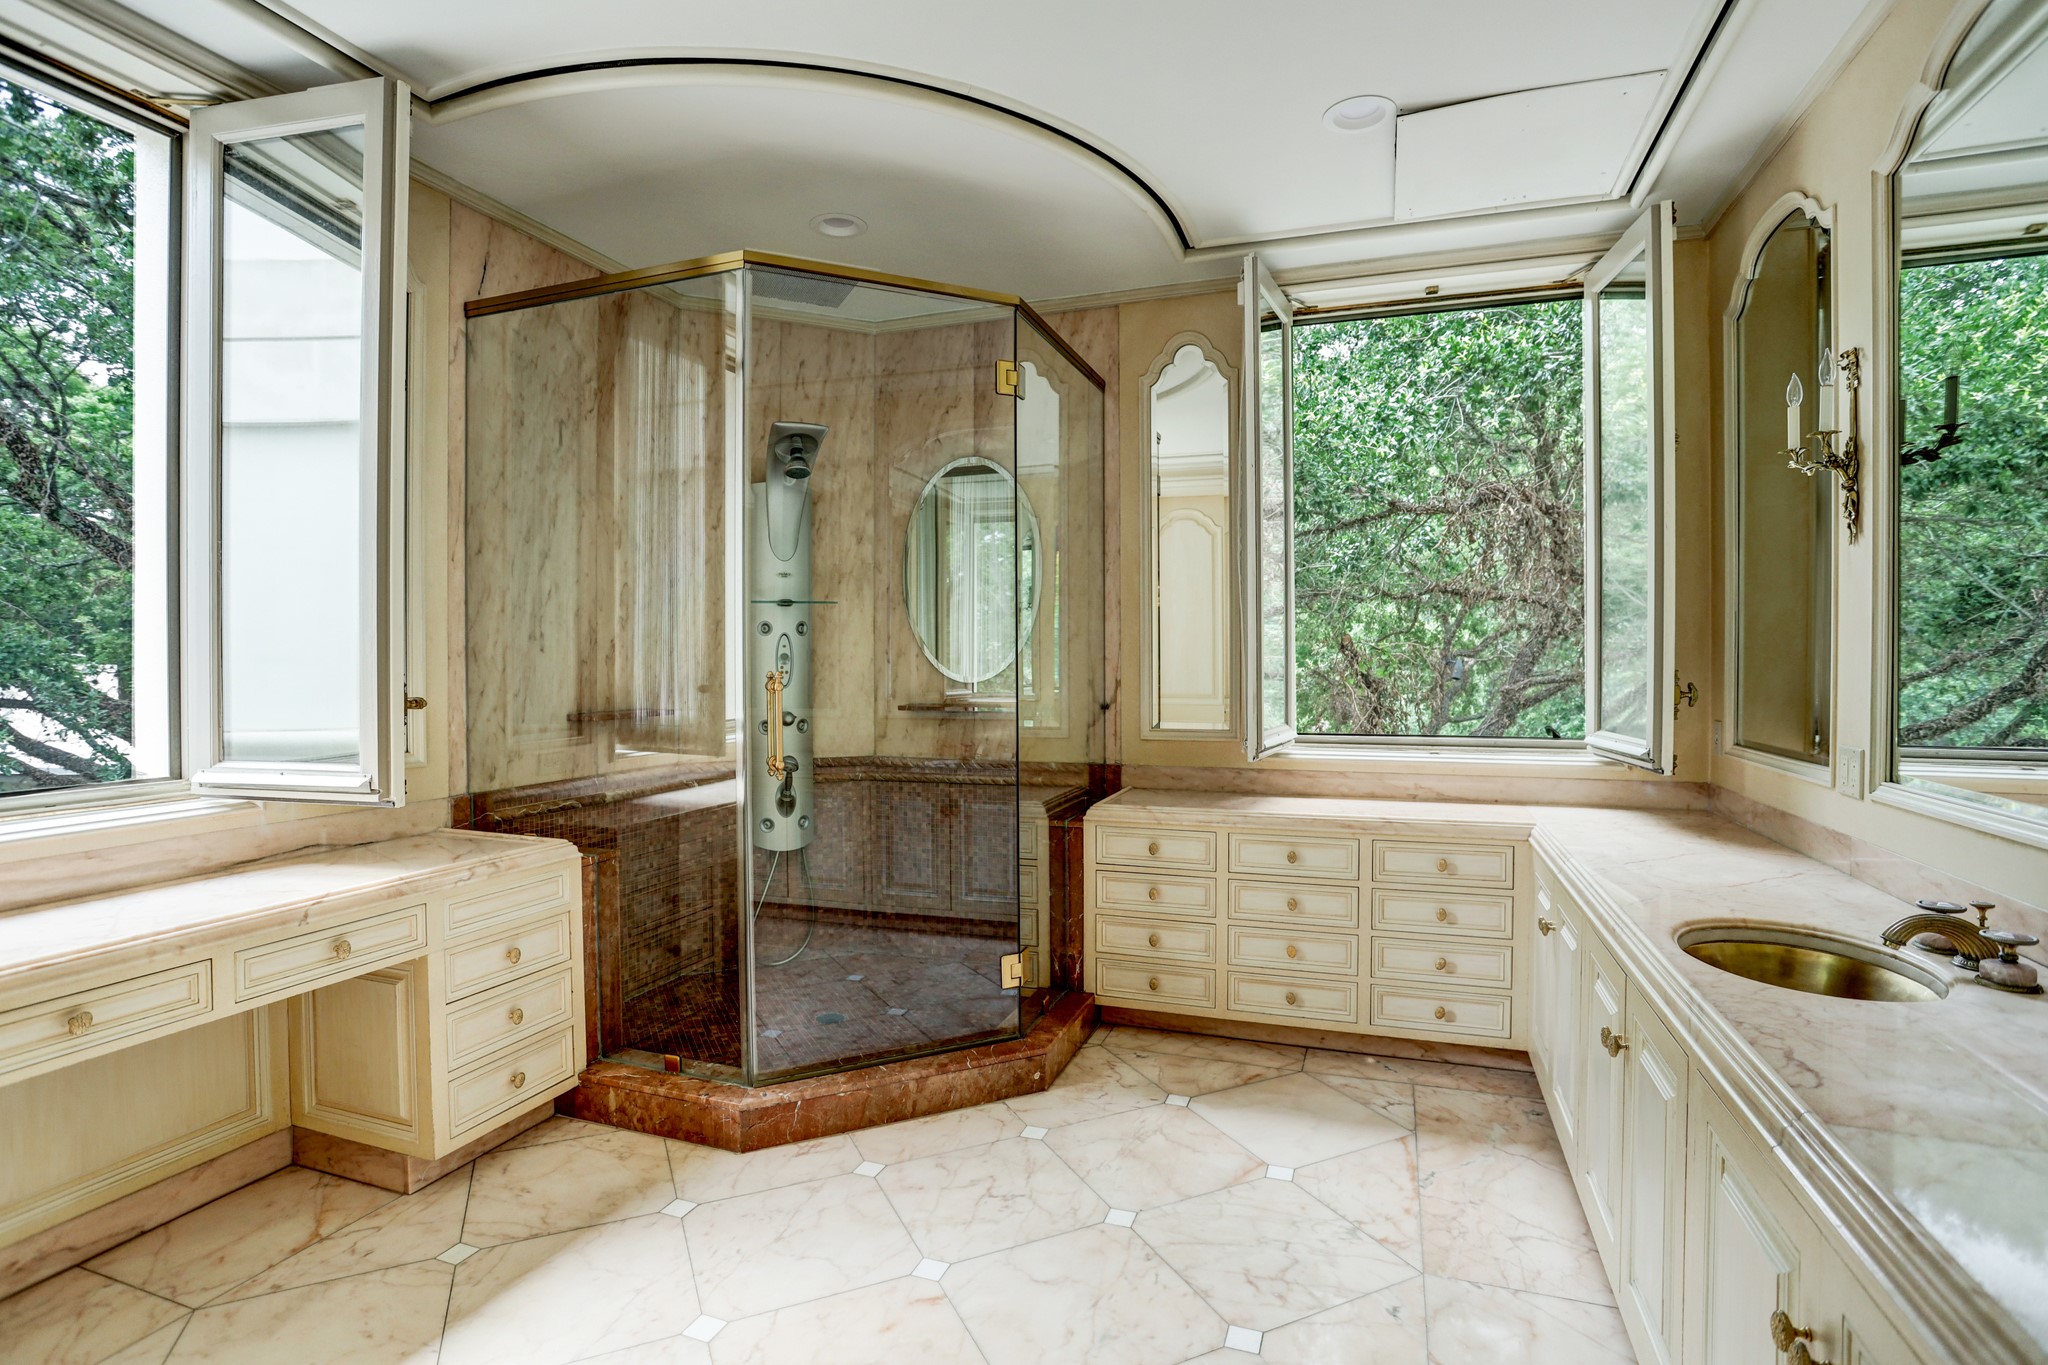 A second primary bath boasts an immense Kohler deep whirlpool soaking tub with padded headrests and hand-shower attachment for ultimate rest and relaxation. Behind the soaking tub is another expansive walk-in shower with marble tiled accents and glass enclosure with frameless glass door. Notice the under-mounted gilded basin situated on the gorgeous slab marble counter and the marble tile floor with contrasting inlaid marble accent panels and borders.